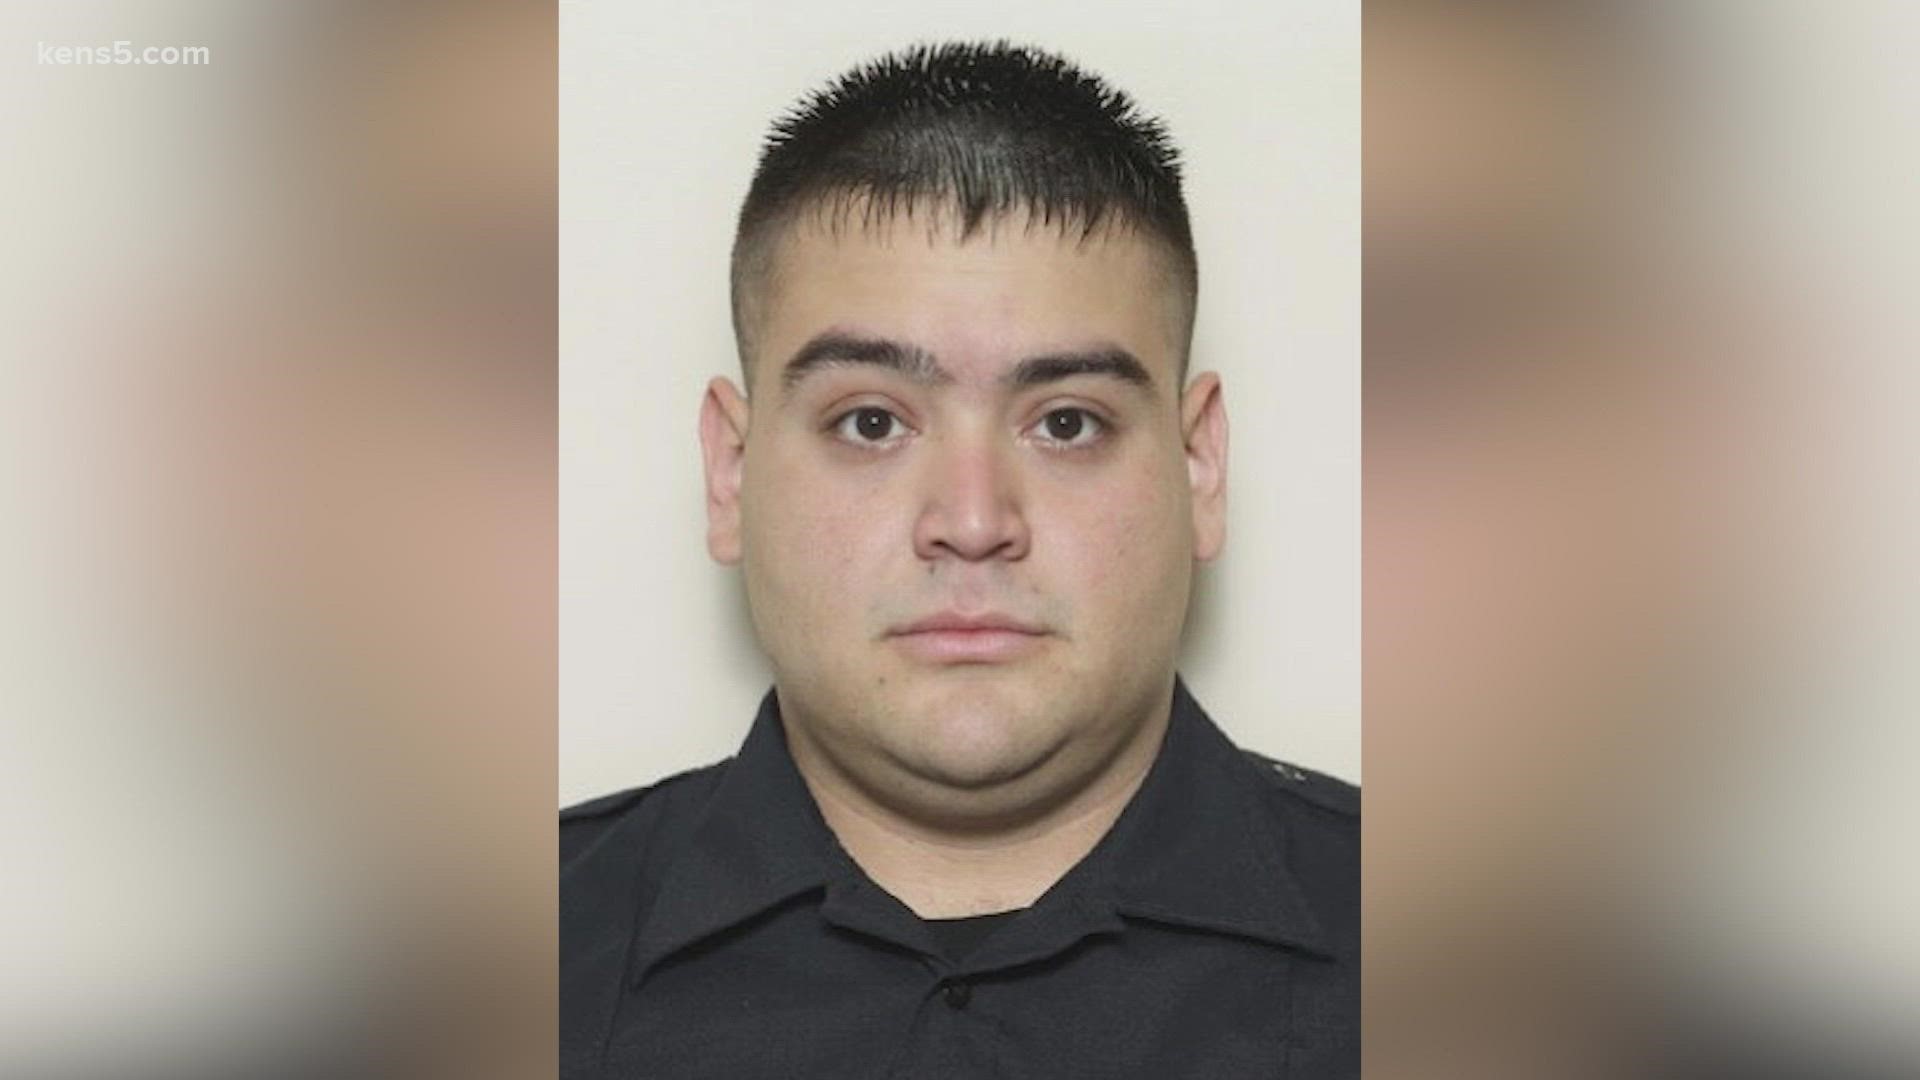 San Antonio police stopped deputy Rolando A Garza just after 2 a.m. Sunday morning, BCSO said in a release.